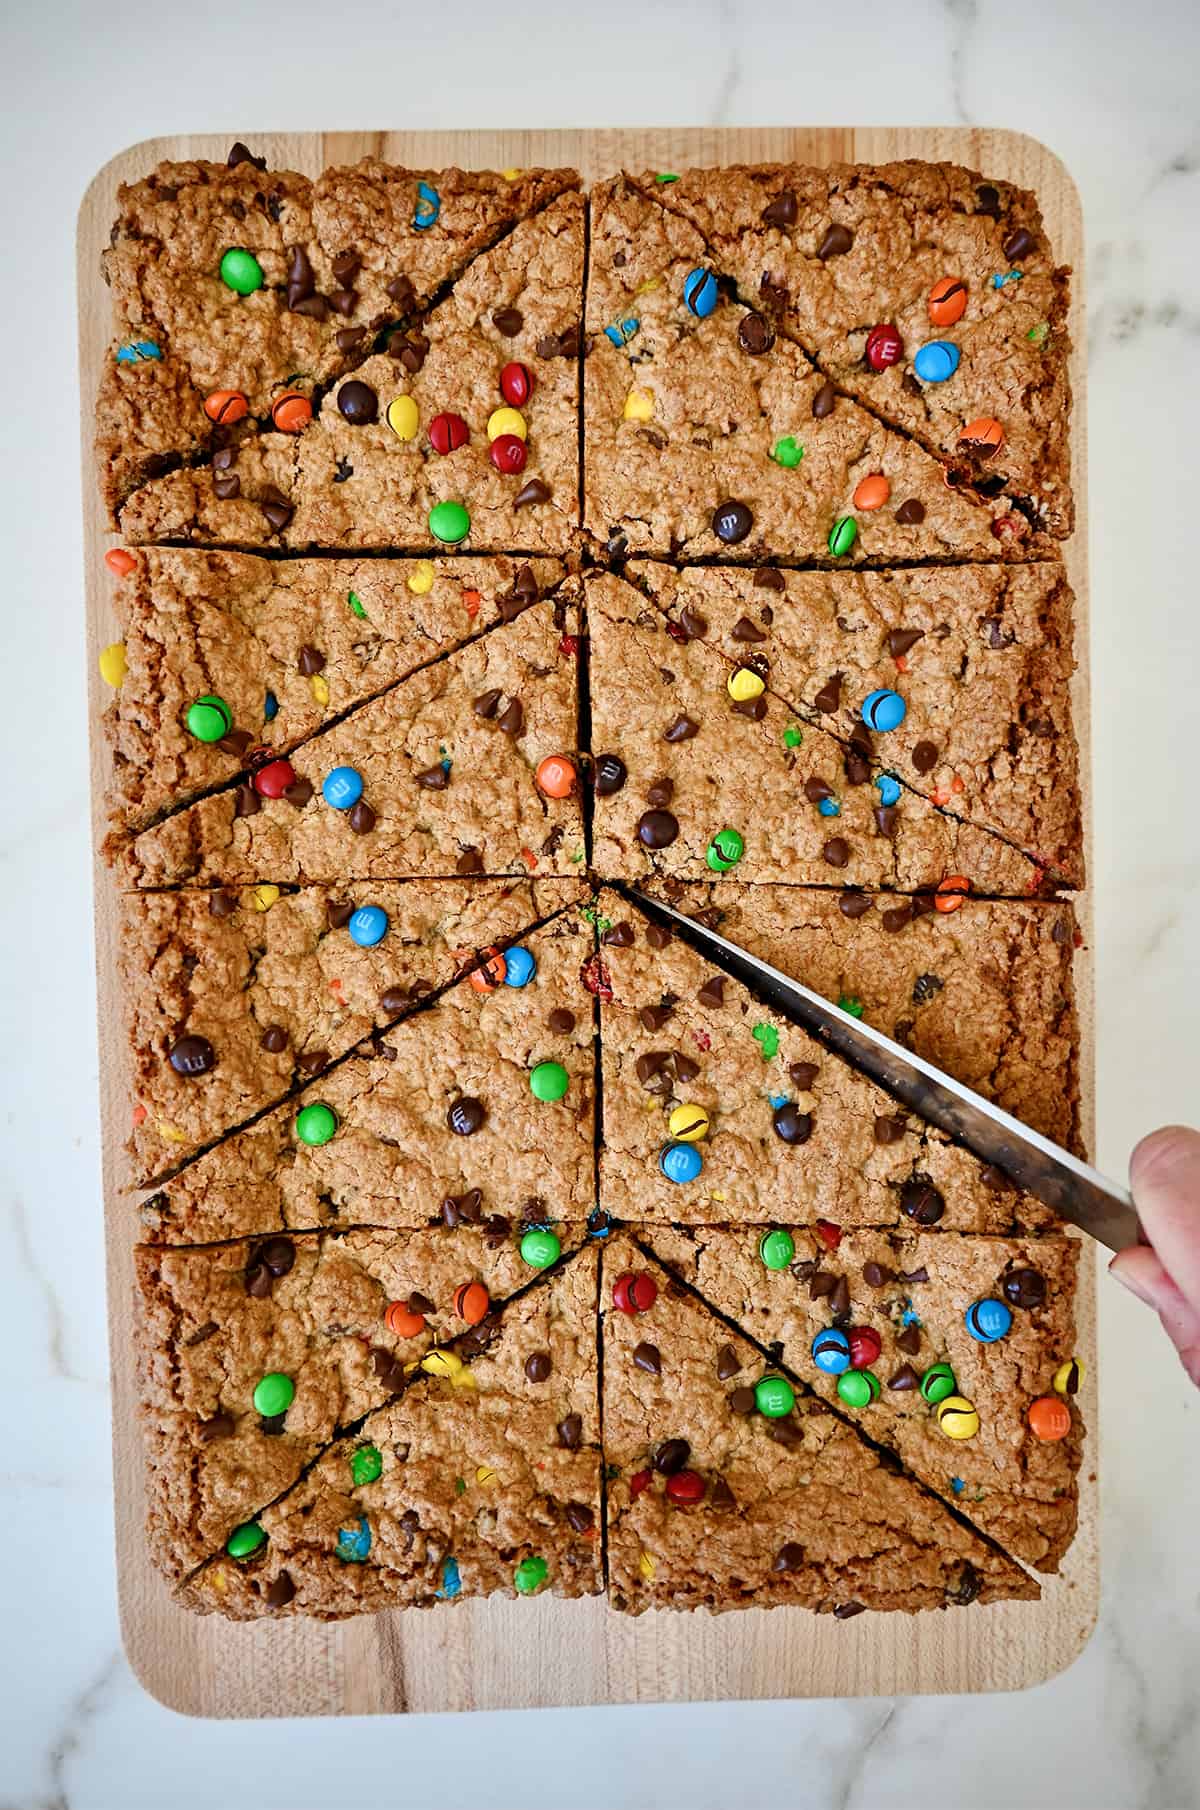 A hand holding a sharp knife cuts peanut butter oatmeal bars studded with M&Ms and chocolate chips into perfect triangles.